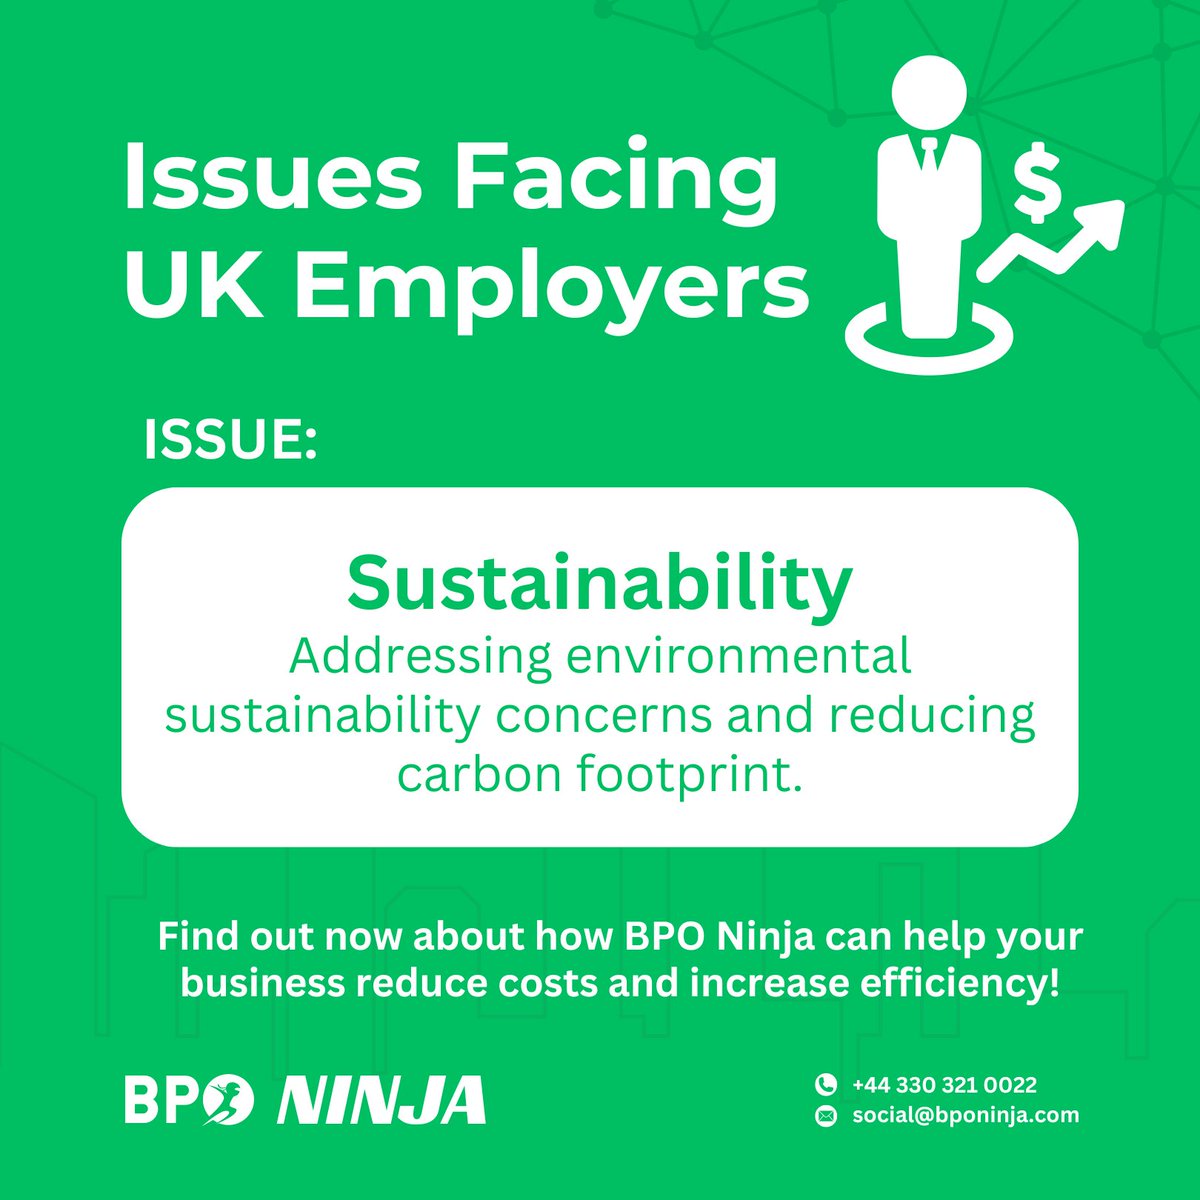 UK employers face challenges in maintaining sustainability.

Contact us: 
P: +44 330 321 0022 
E: social@bponija.com 
W: eu1.hubs.ly/H08QWZg0 

#BPO #BusinessProcessOutsourcing #Outsourcing #CostCutting #UKBusiness #PhilippineOutsourcing #BPOExcellence #GlobalBusiness